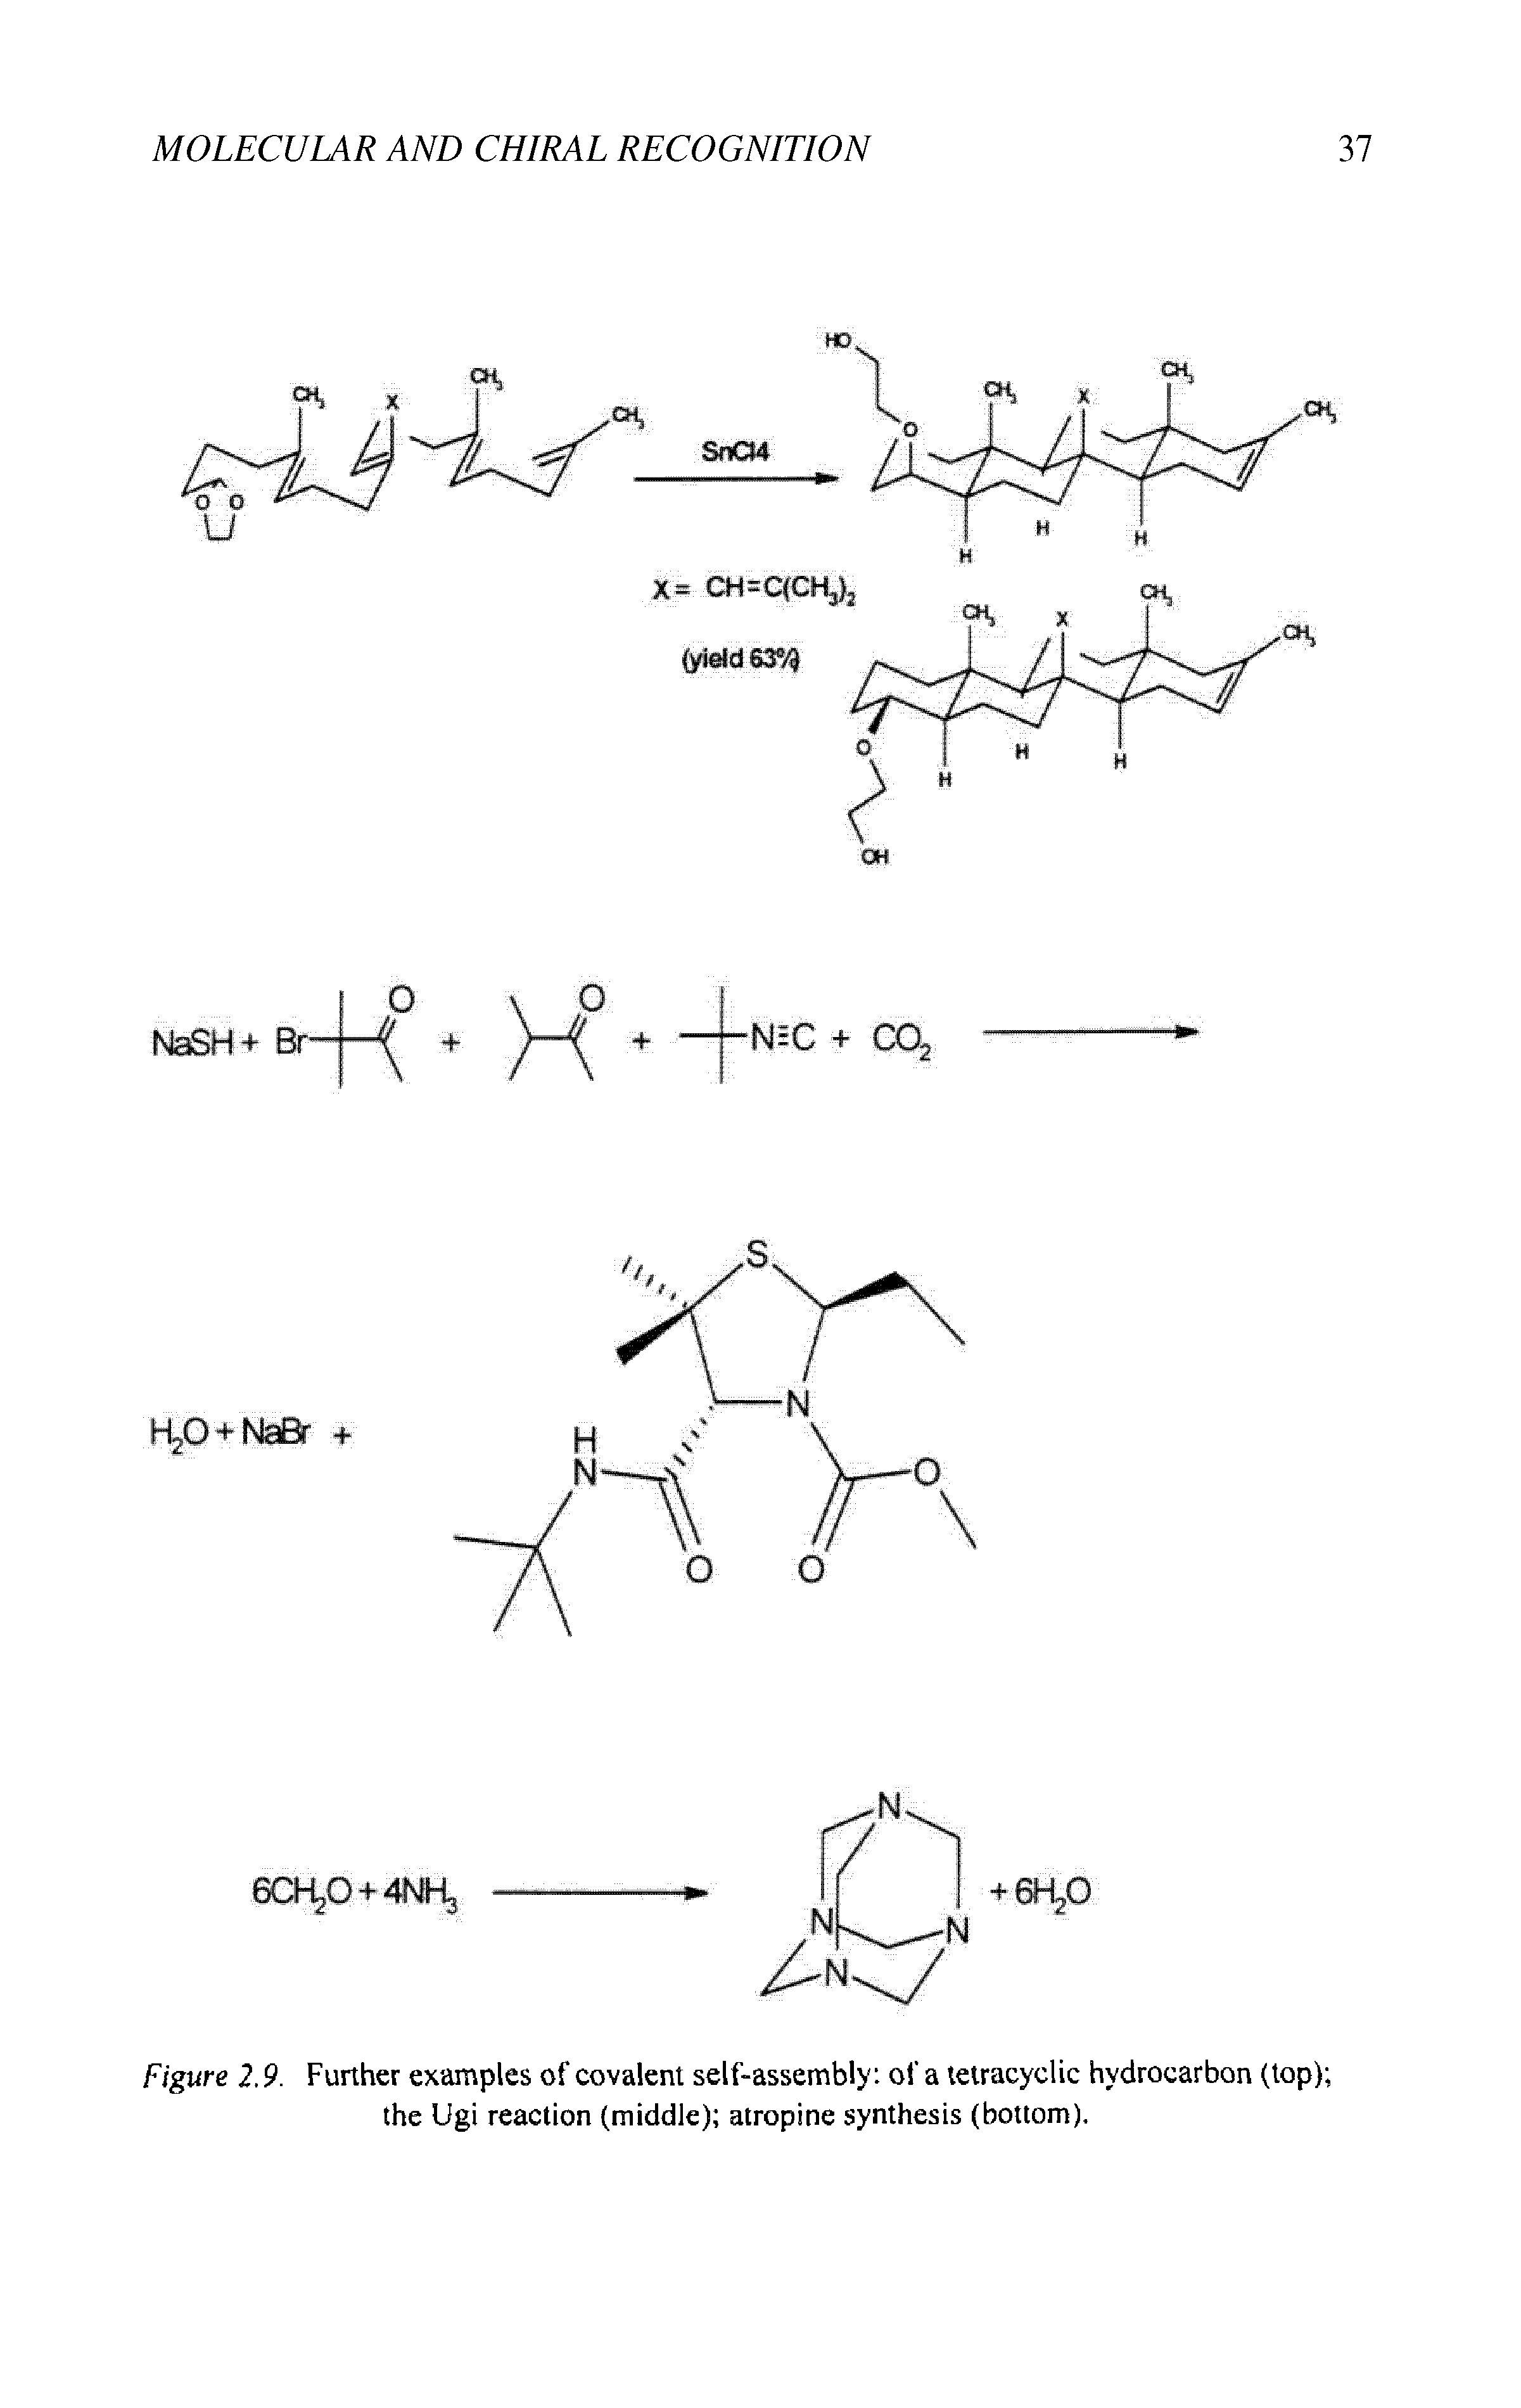 Figure 2.9. Further examples of covalent self-assembly of a tetracyclic hydrocarbon (top) the Ugi reaction (middle) atropine synthesis (bottom).